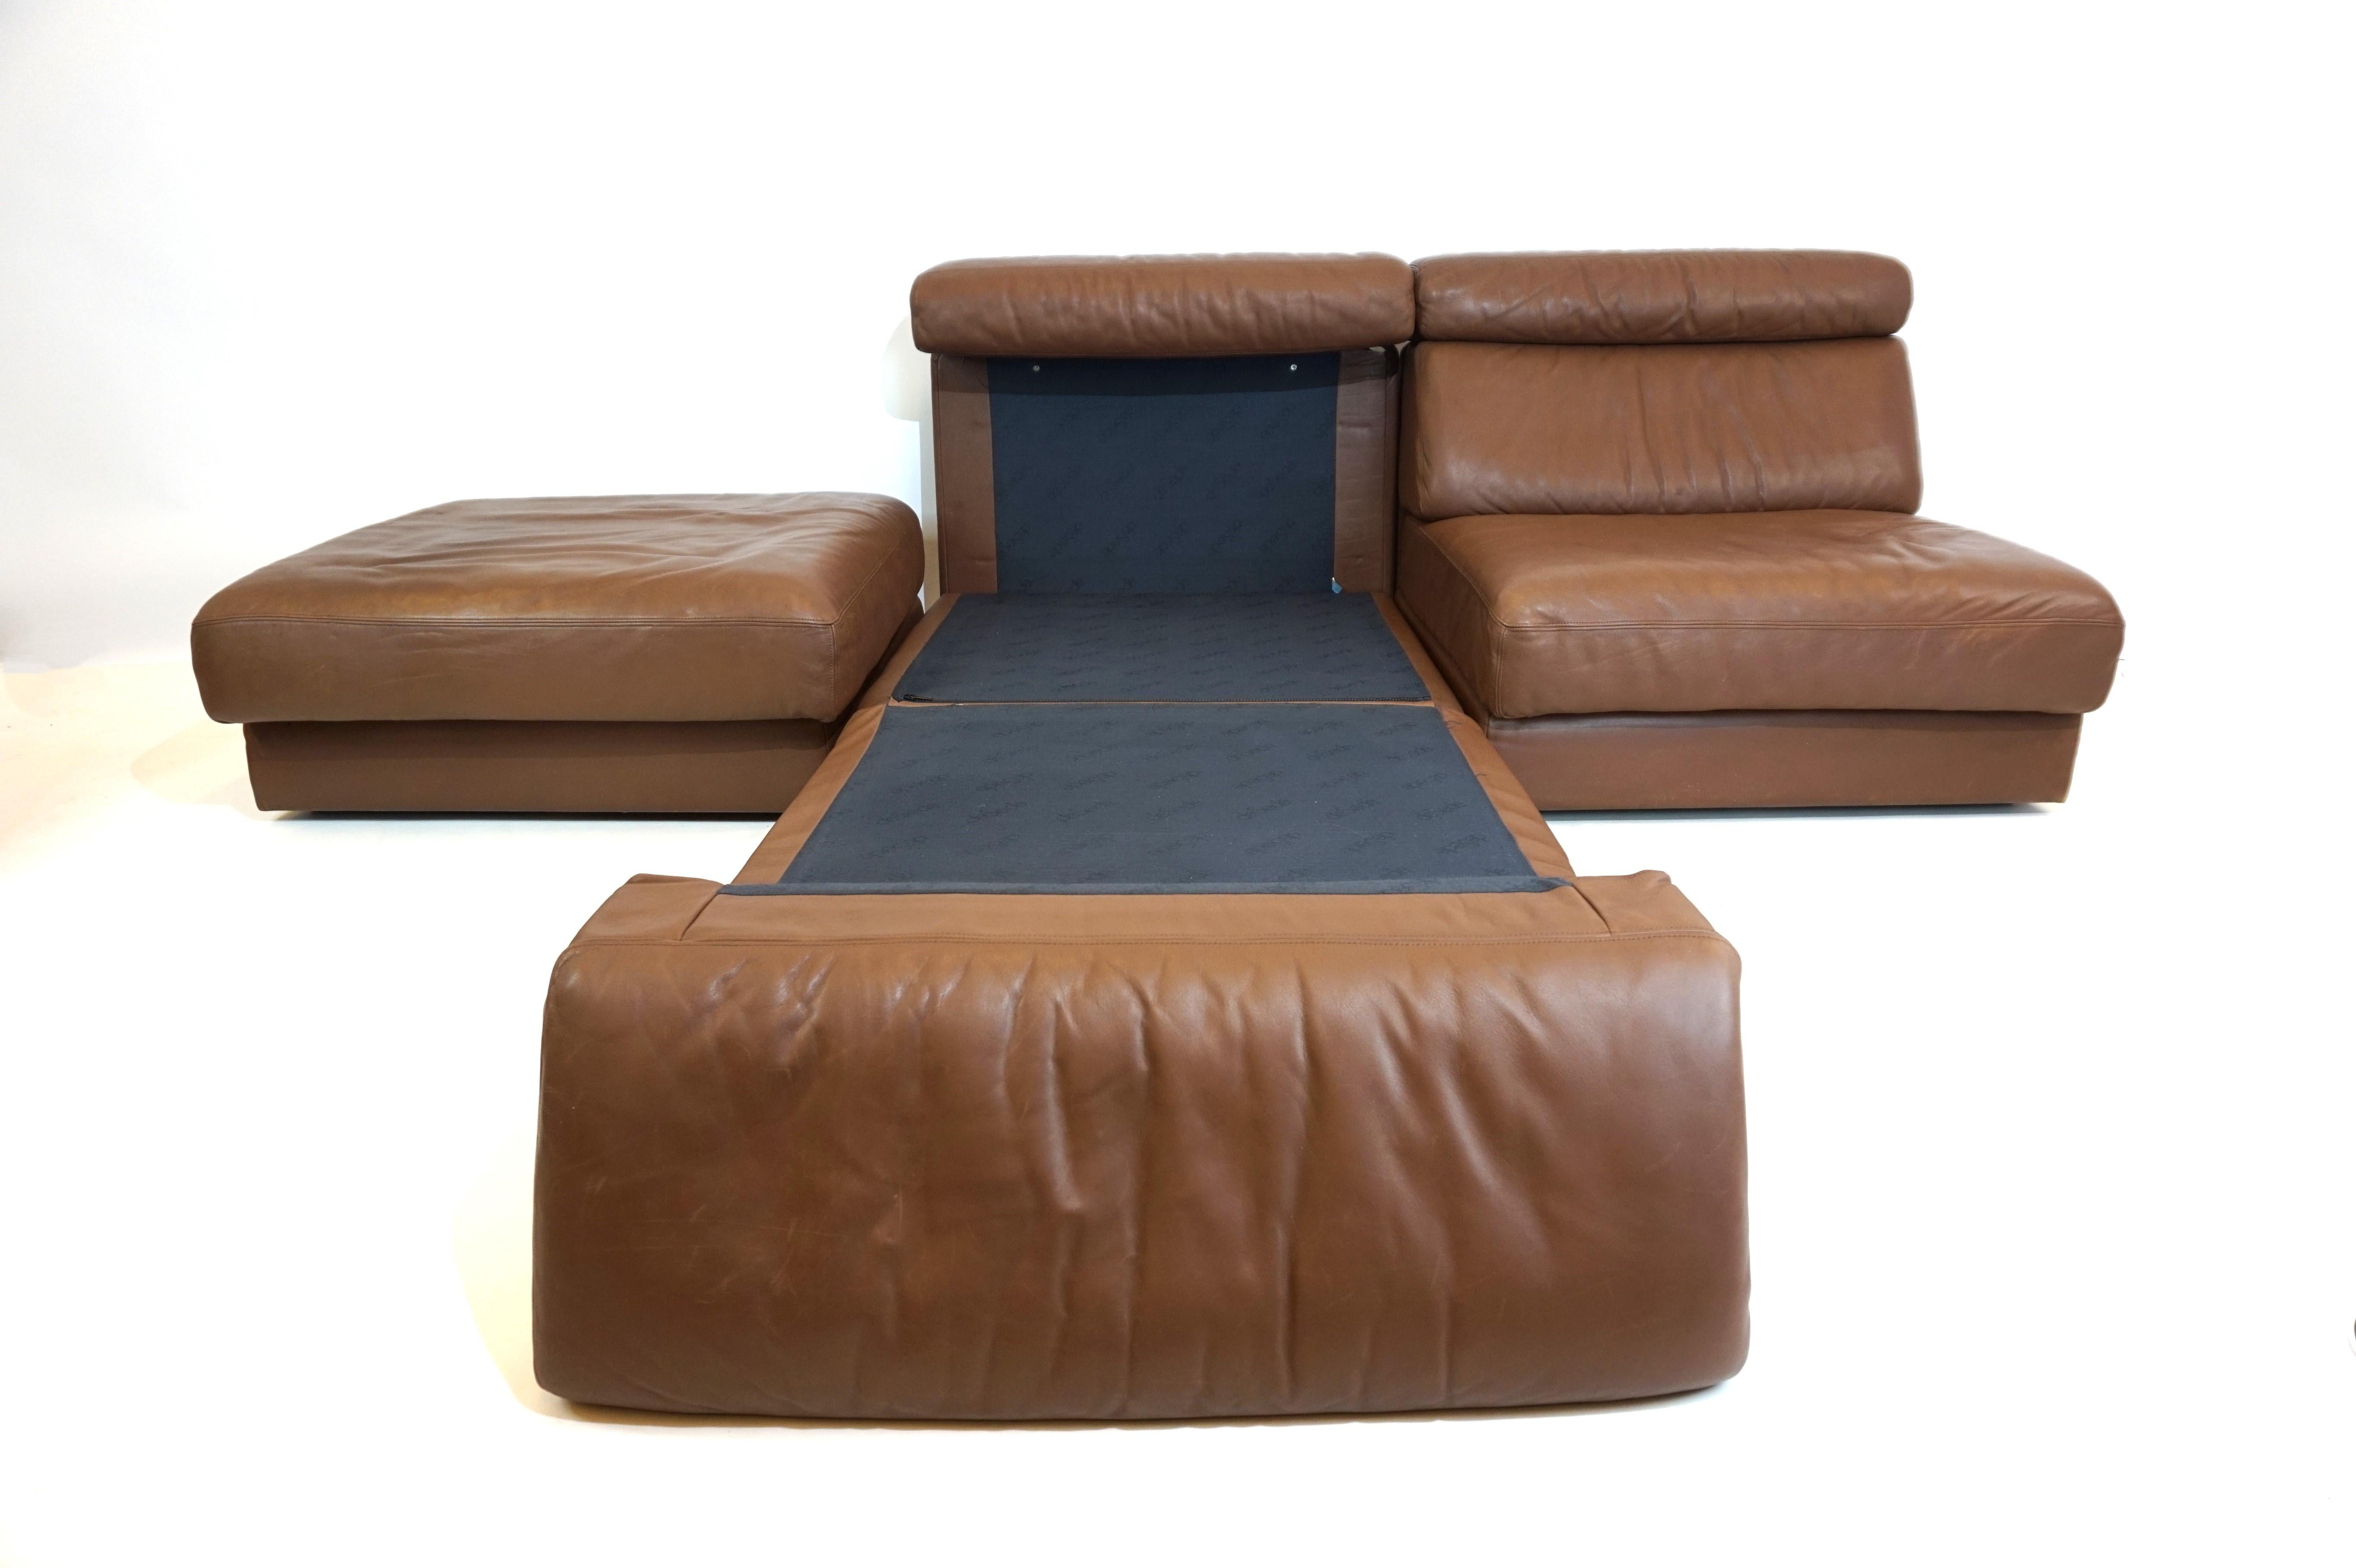 This modular sofa consists of 2 armchairs and a seat cushion, all of which can easily be converted into a comfortable bed. The brown leather of the armchairs and the ottoman is in very good condition, soft and without damage, only minimal signs of